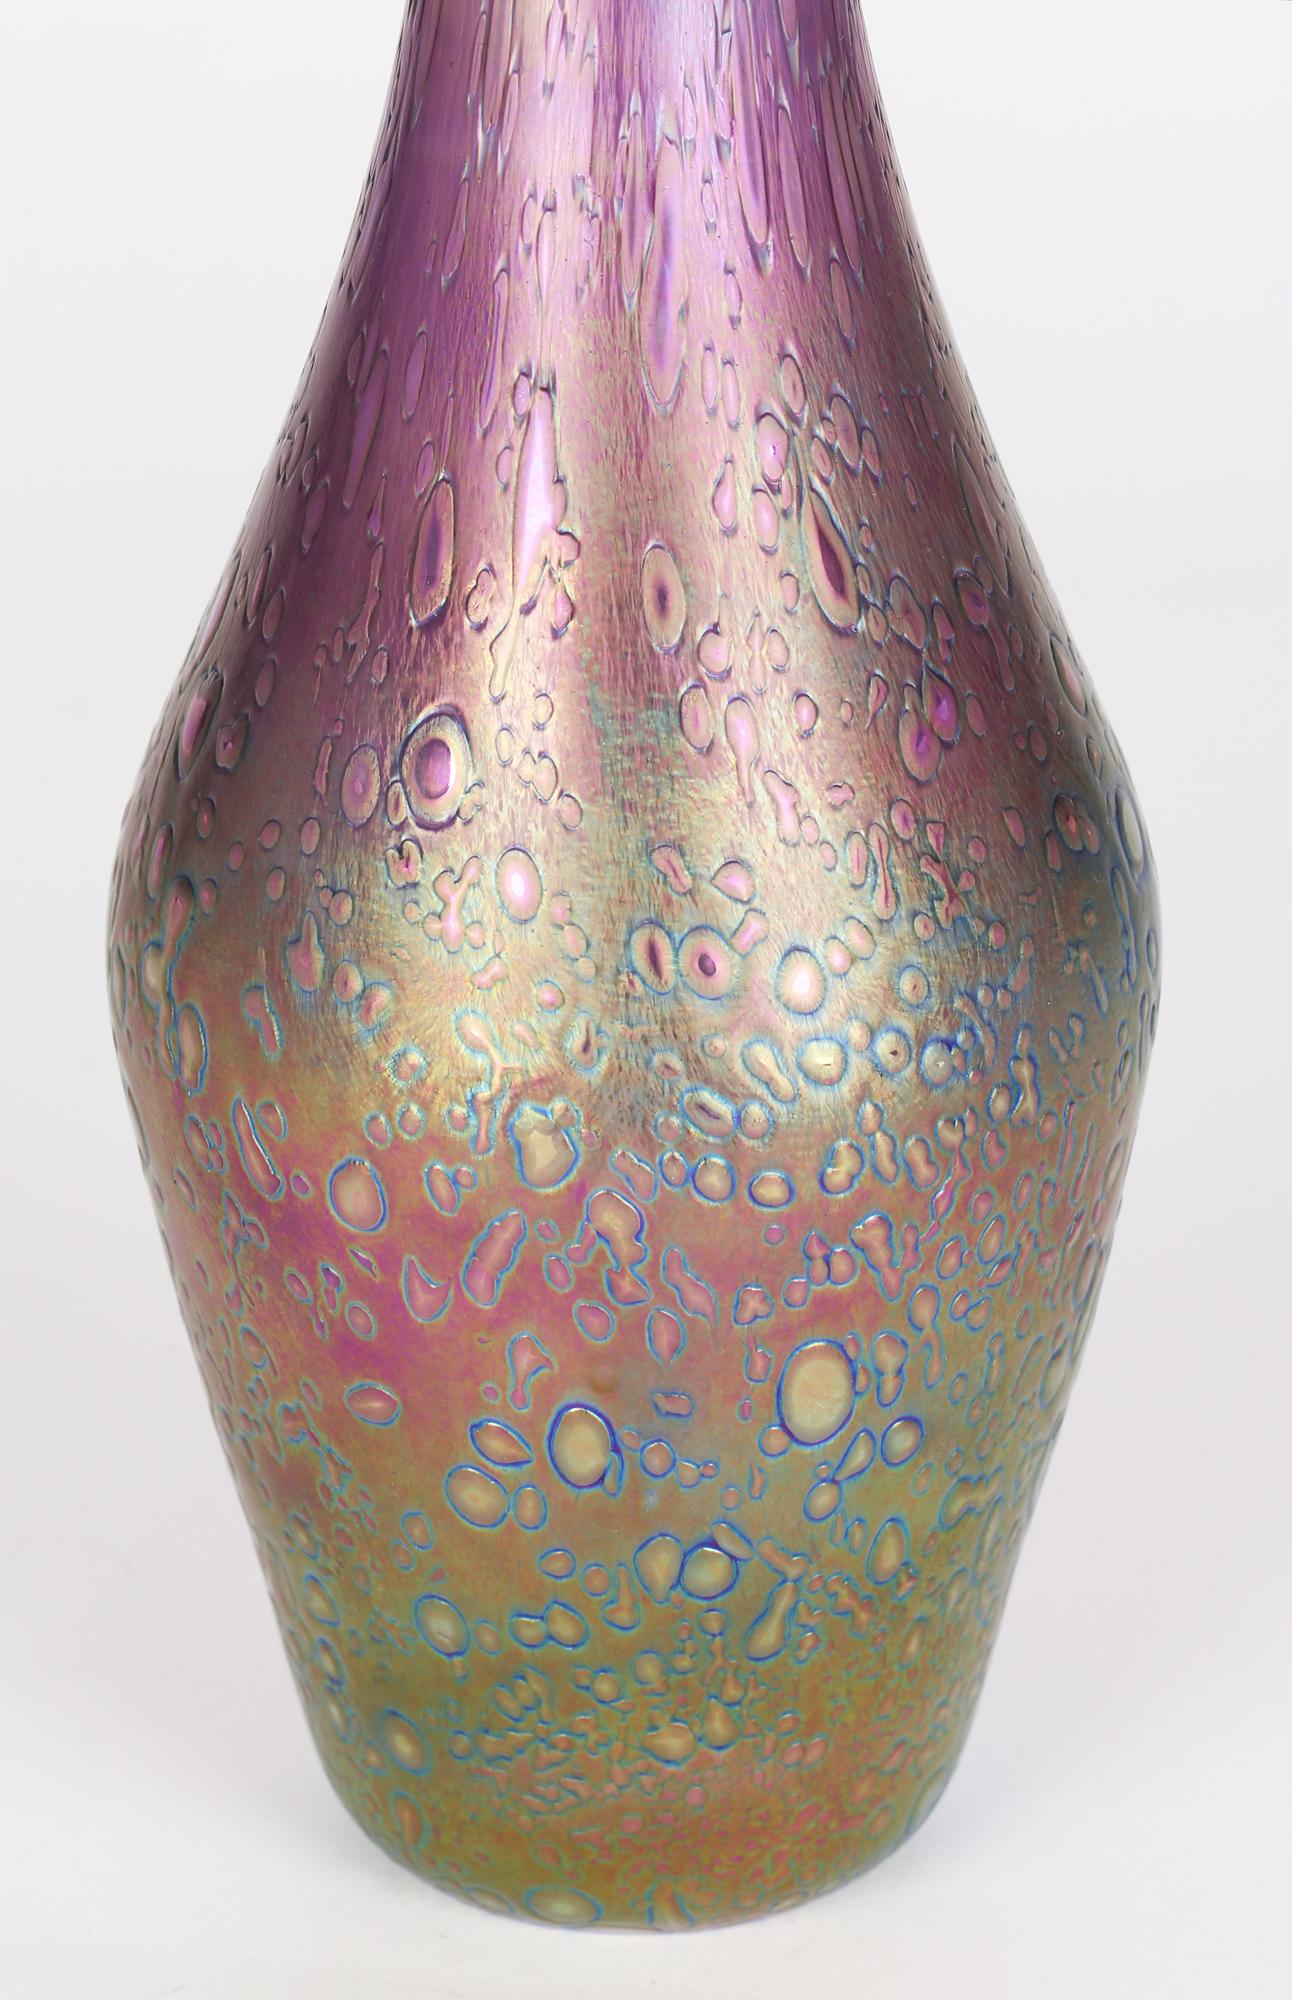 Fine vintage Jack in the pulpit iridescent art glass vase, possibly by Heron Glass or Czech and dating from the 20th century. The vase has an amethyst tint and is hand blown with a textured finish to the body with a large lily flower top and is